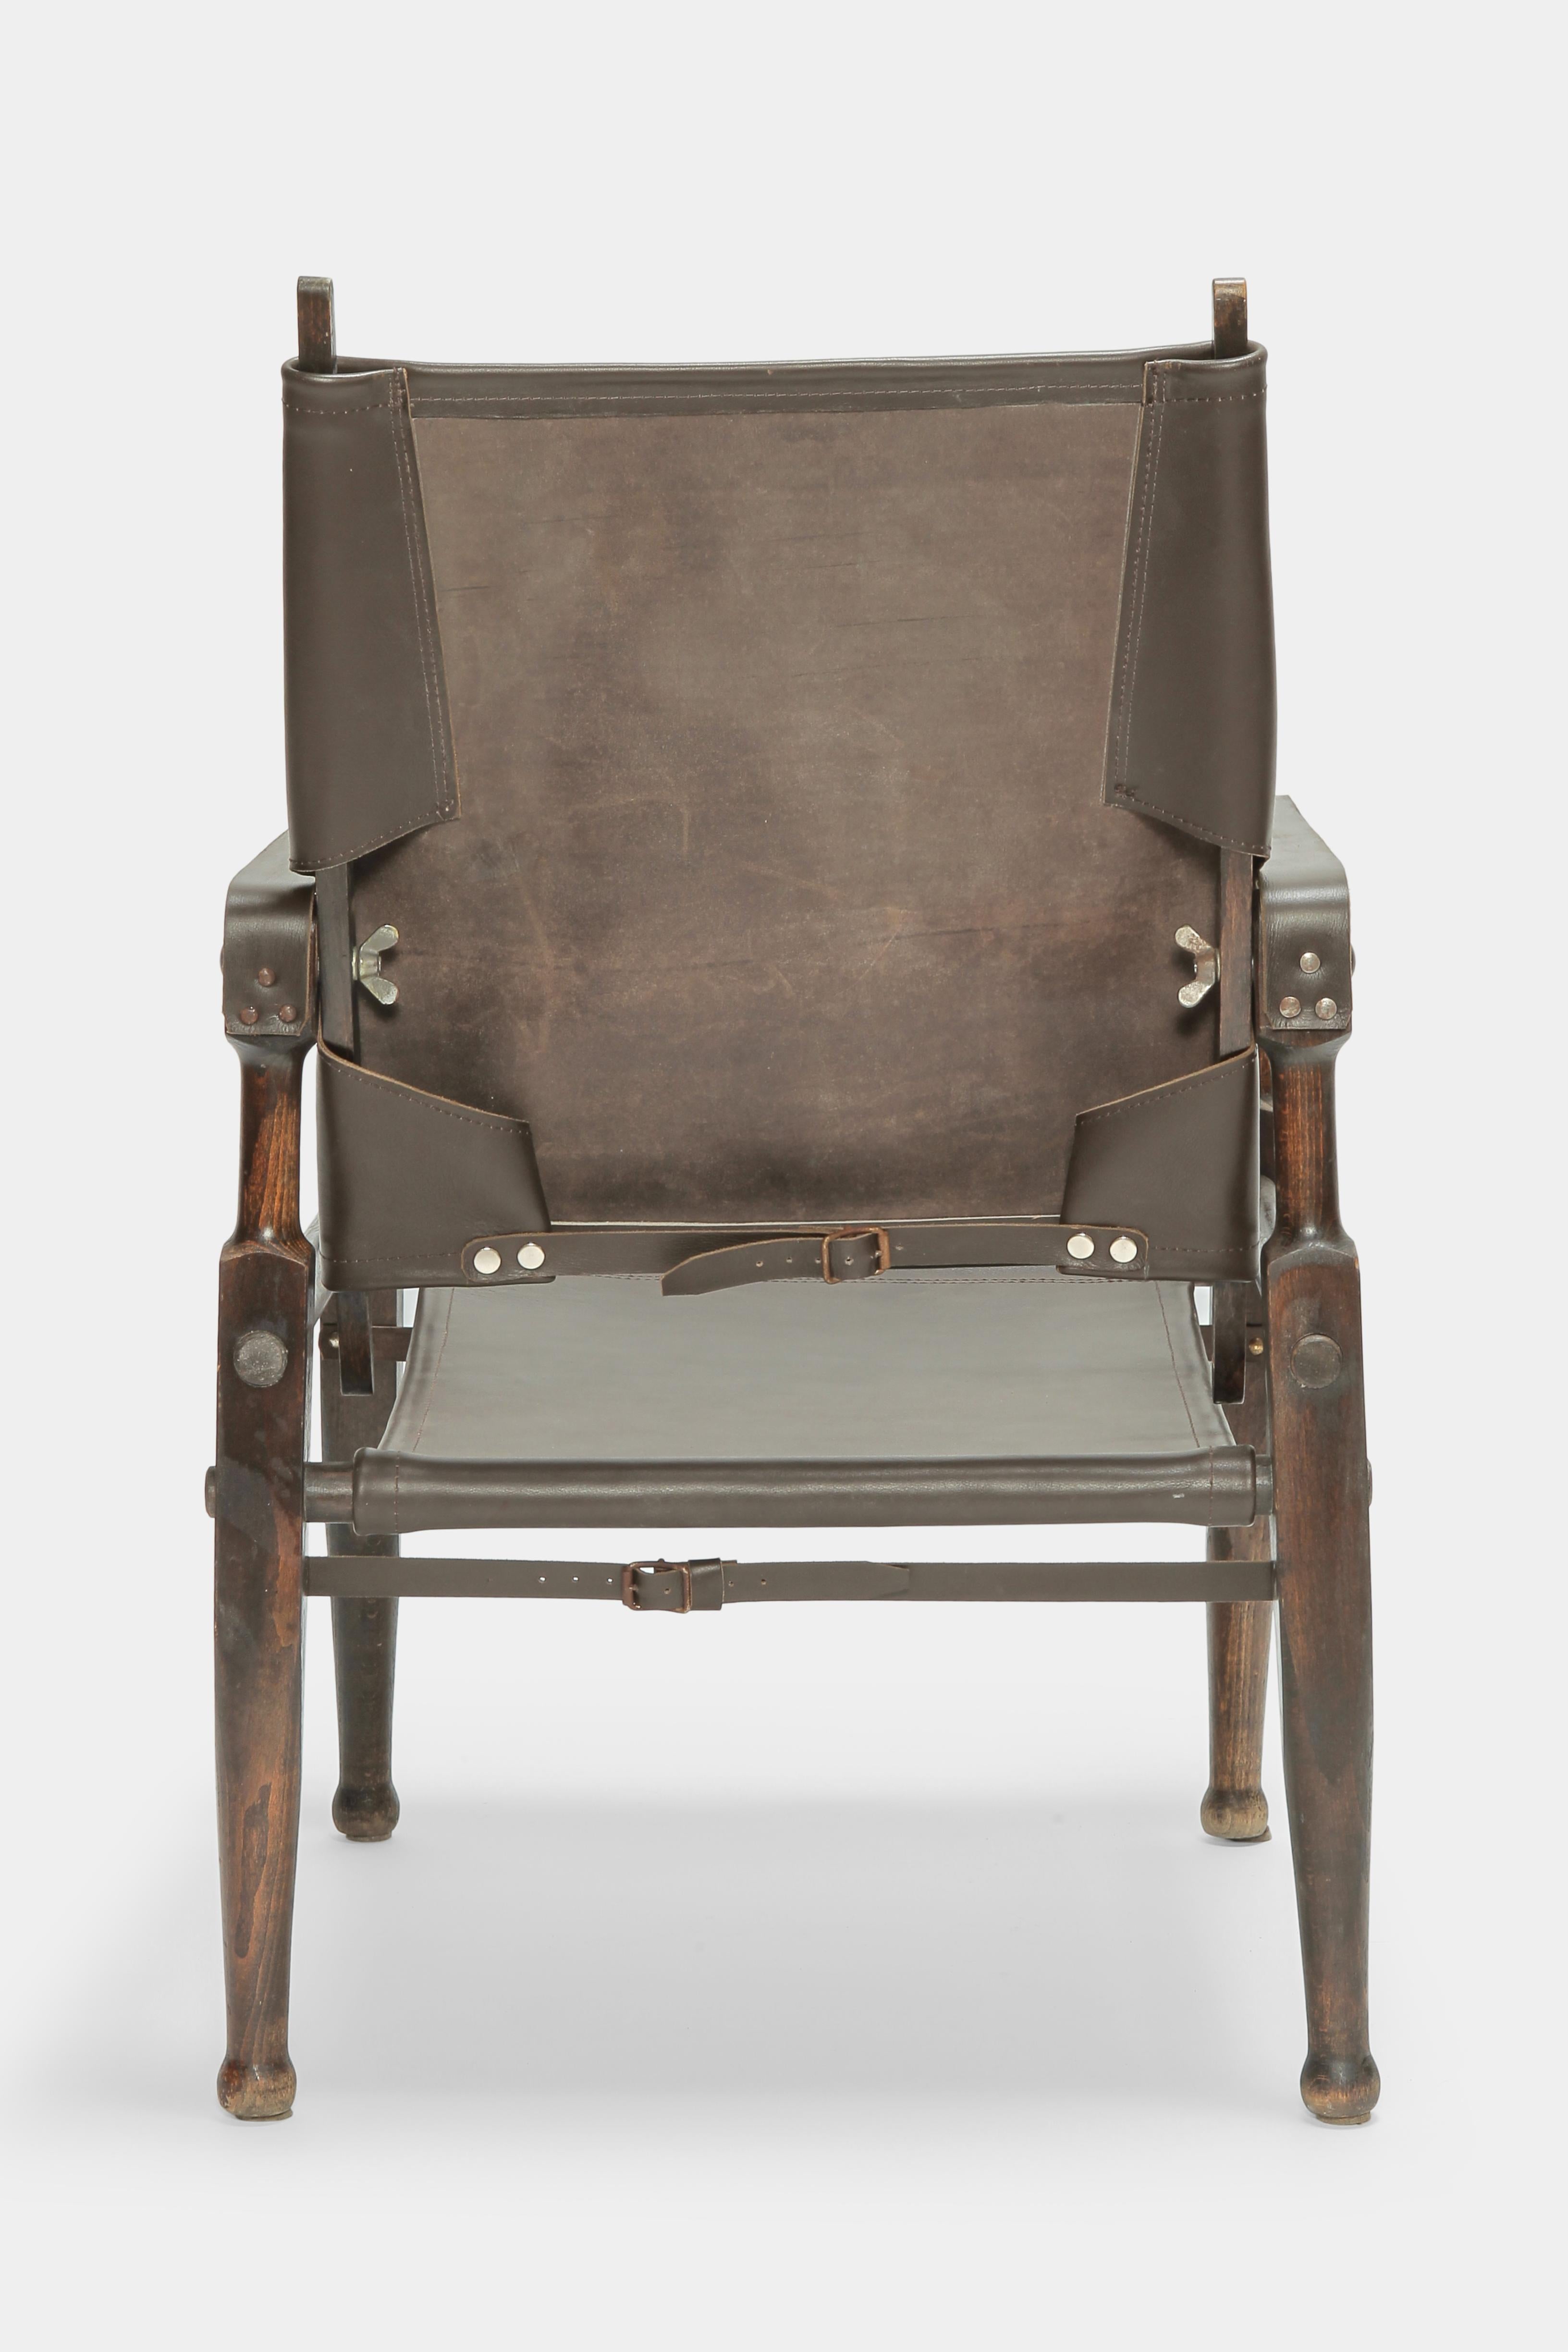 Kienzle Safari Chair by Wohnbedarf 1950s with New Leather In Good Condition For Sale In Basel, CH